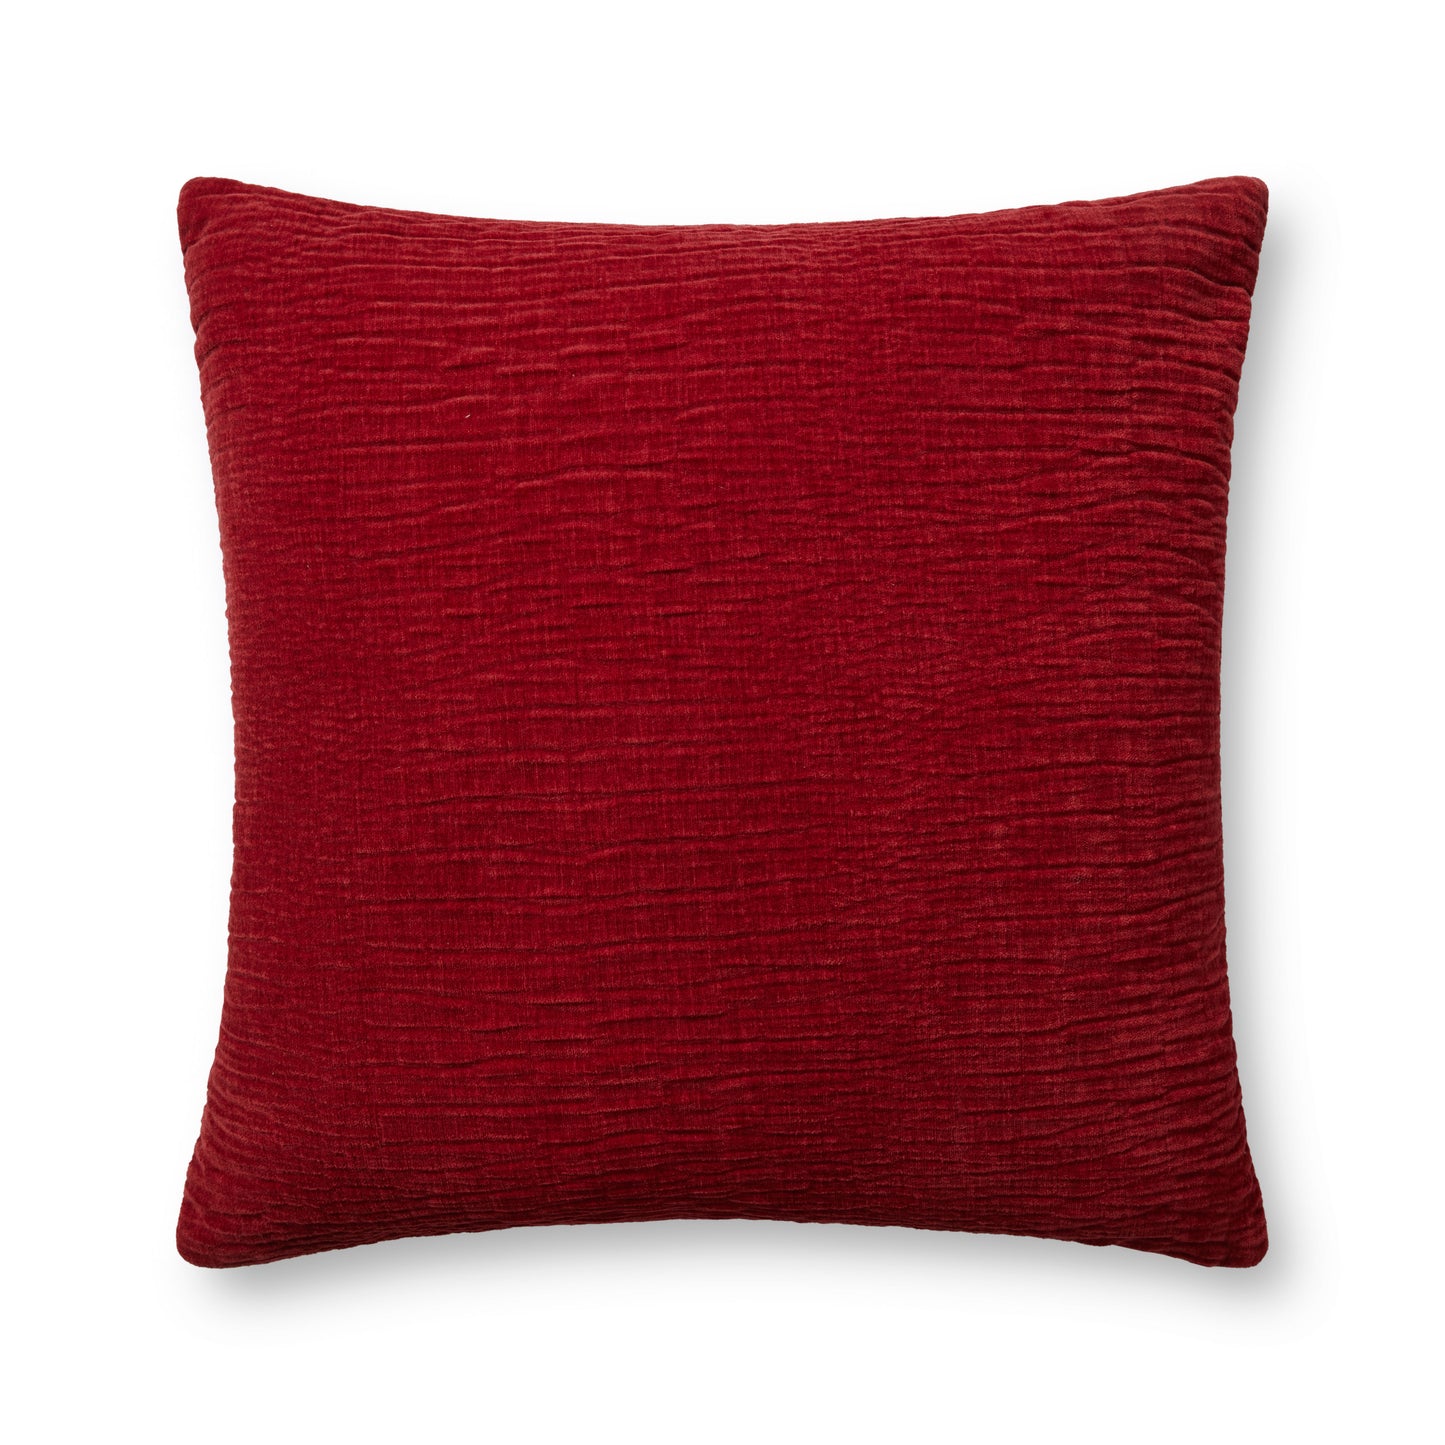 Photo of a pillow;  Red 22'' x 22'' Cover w/Poly Pillow